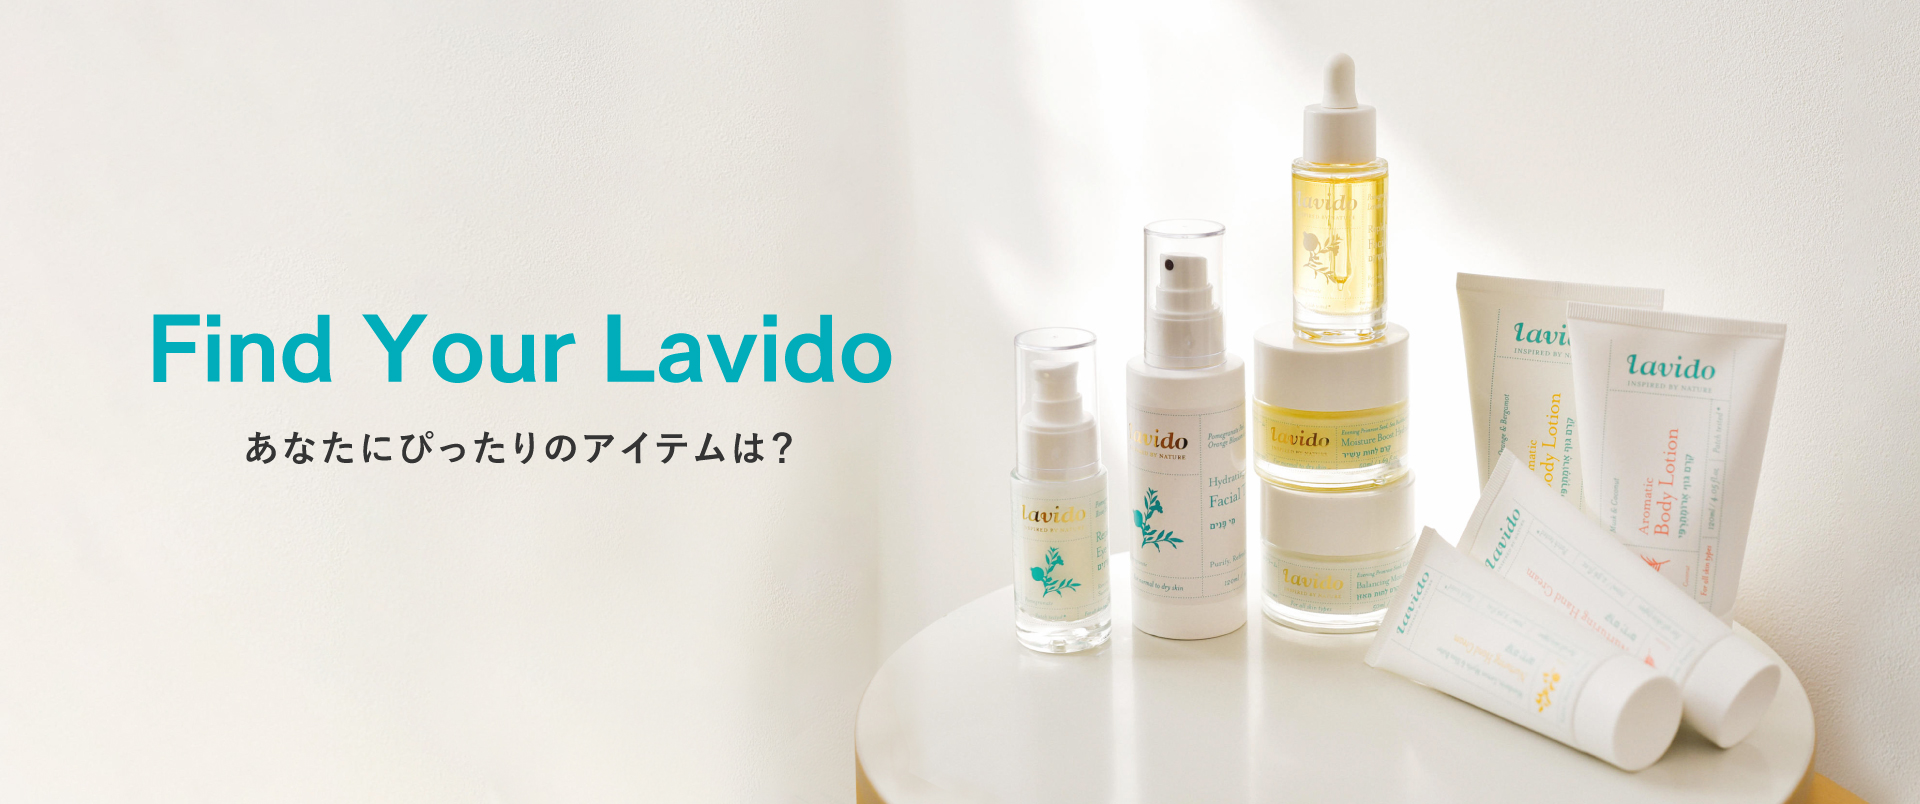 Find Your Lavido　あなたにぴったりのアイテムは？